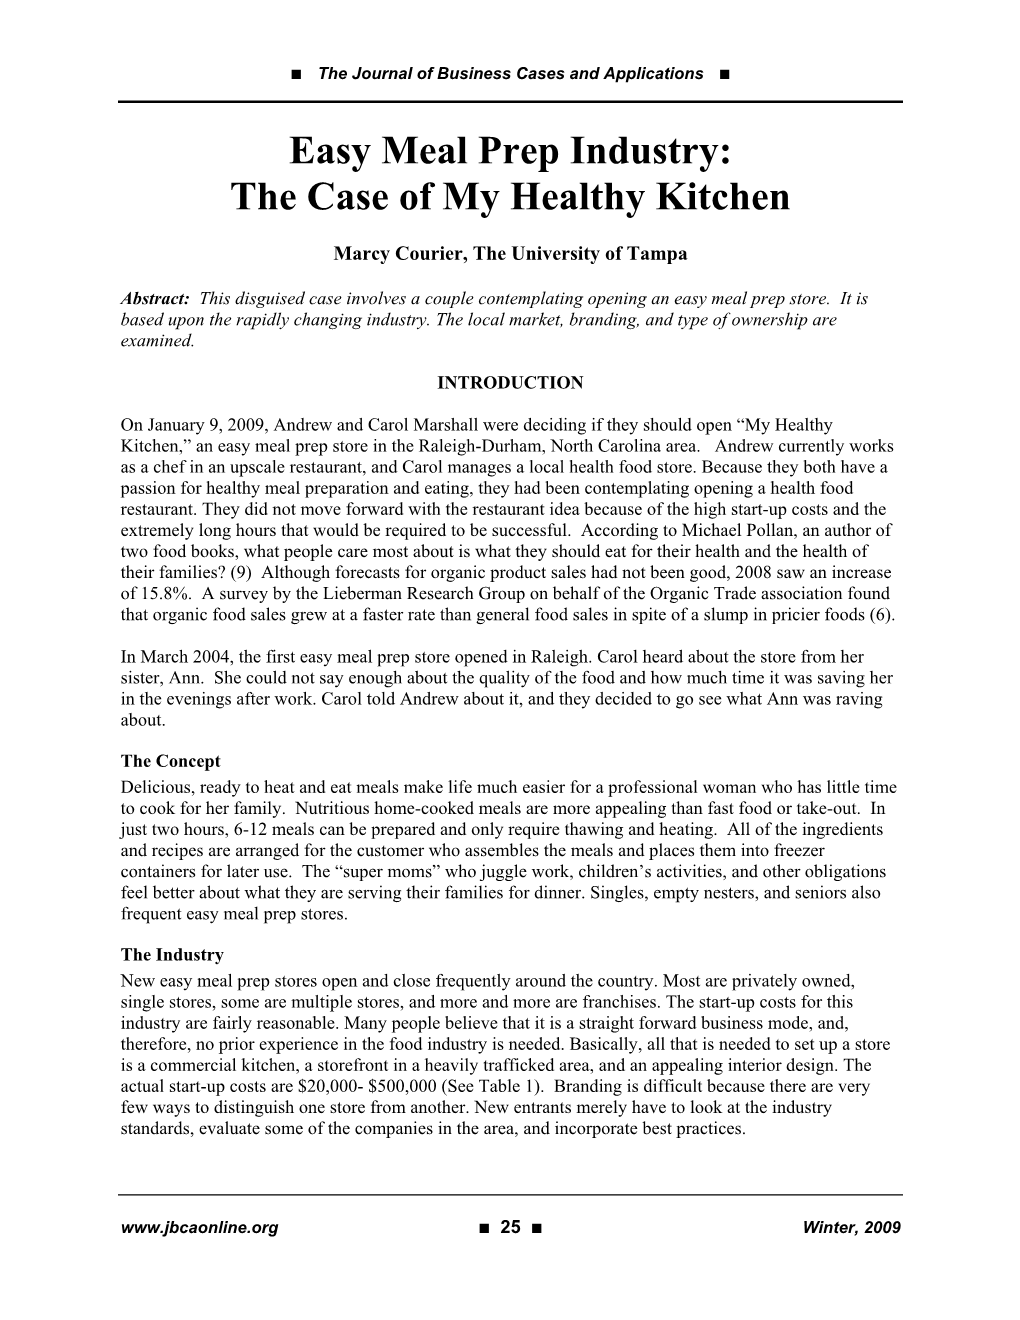 Easy Meal Prep Industry: the Case of My Healthy Kitchen